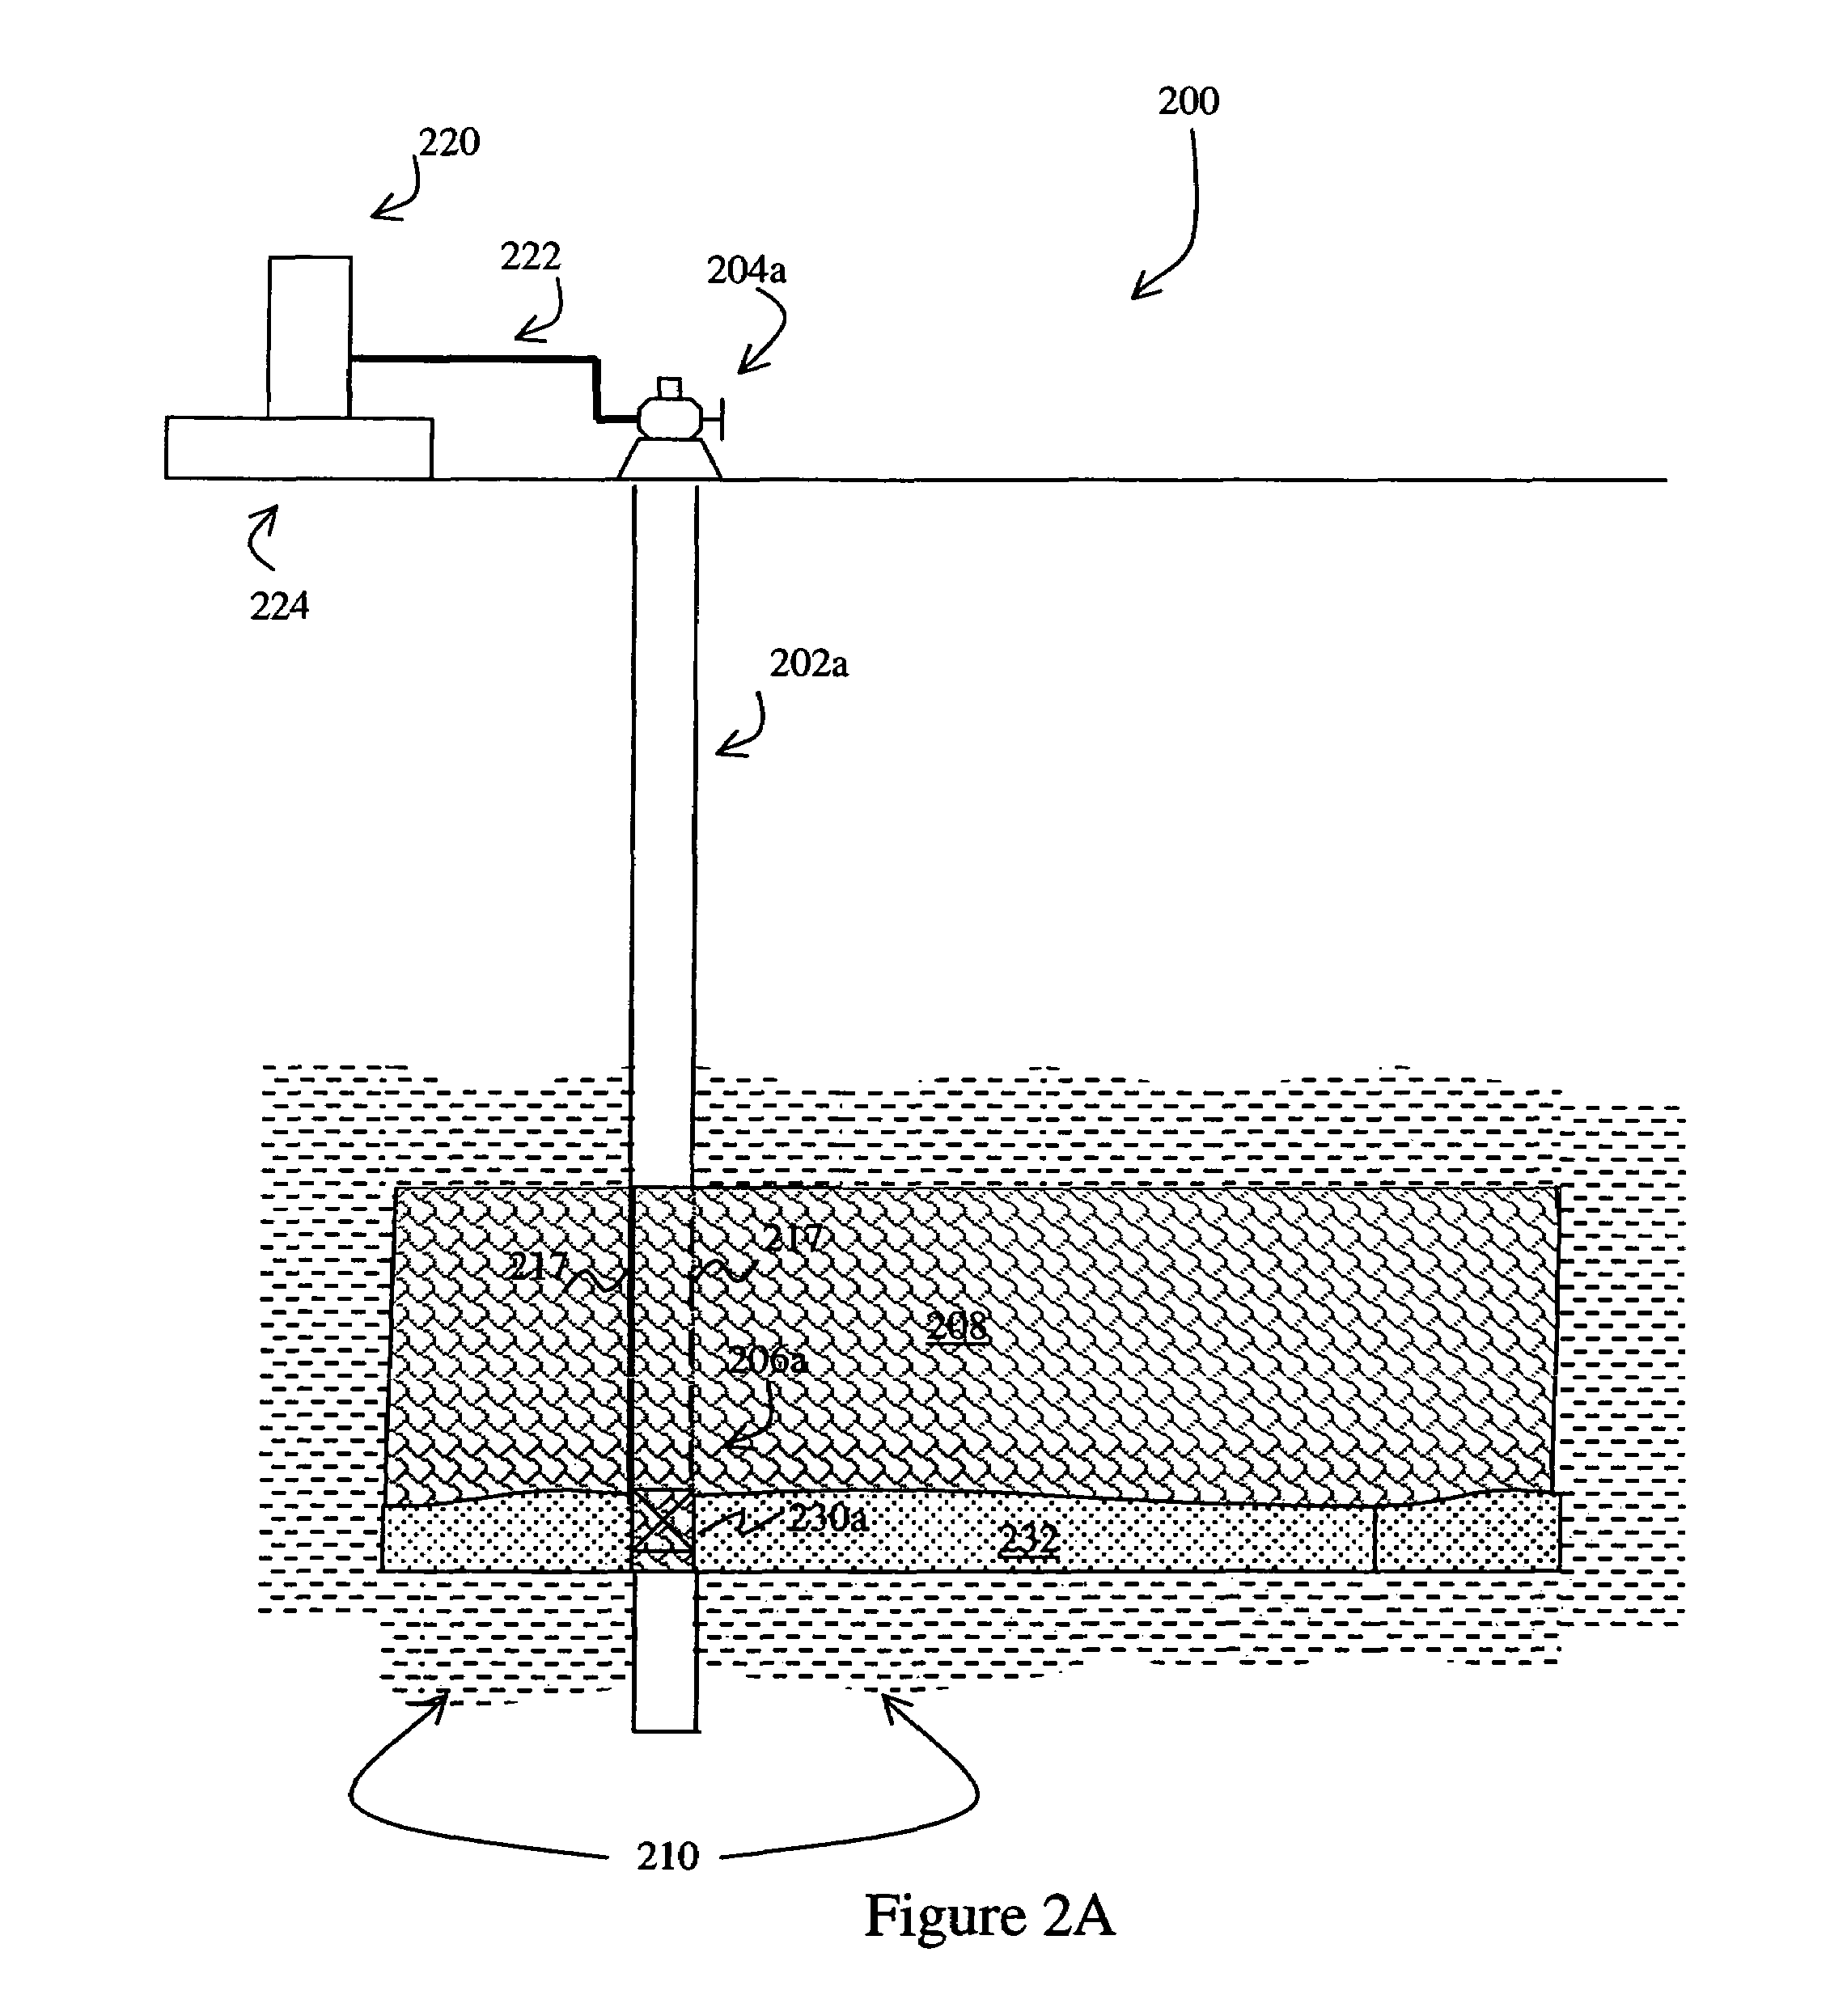 Systems and methods for underground storage of biogas